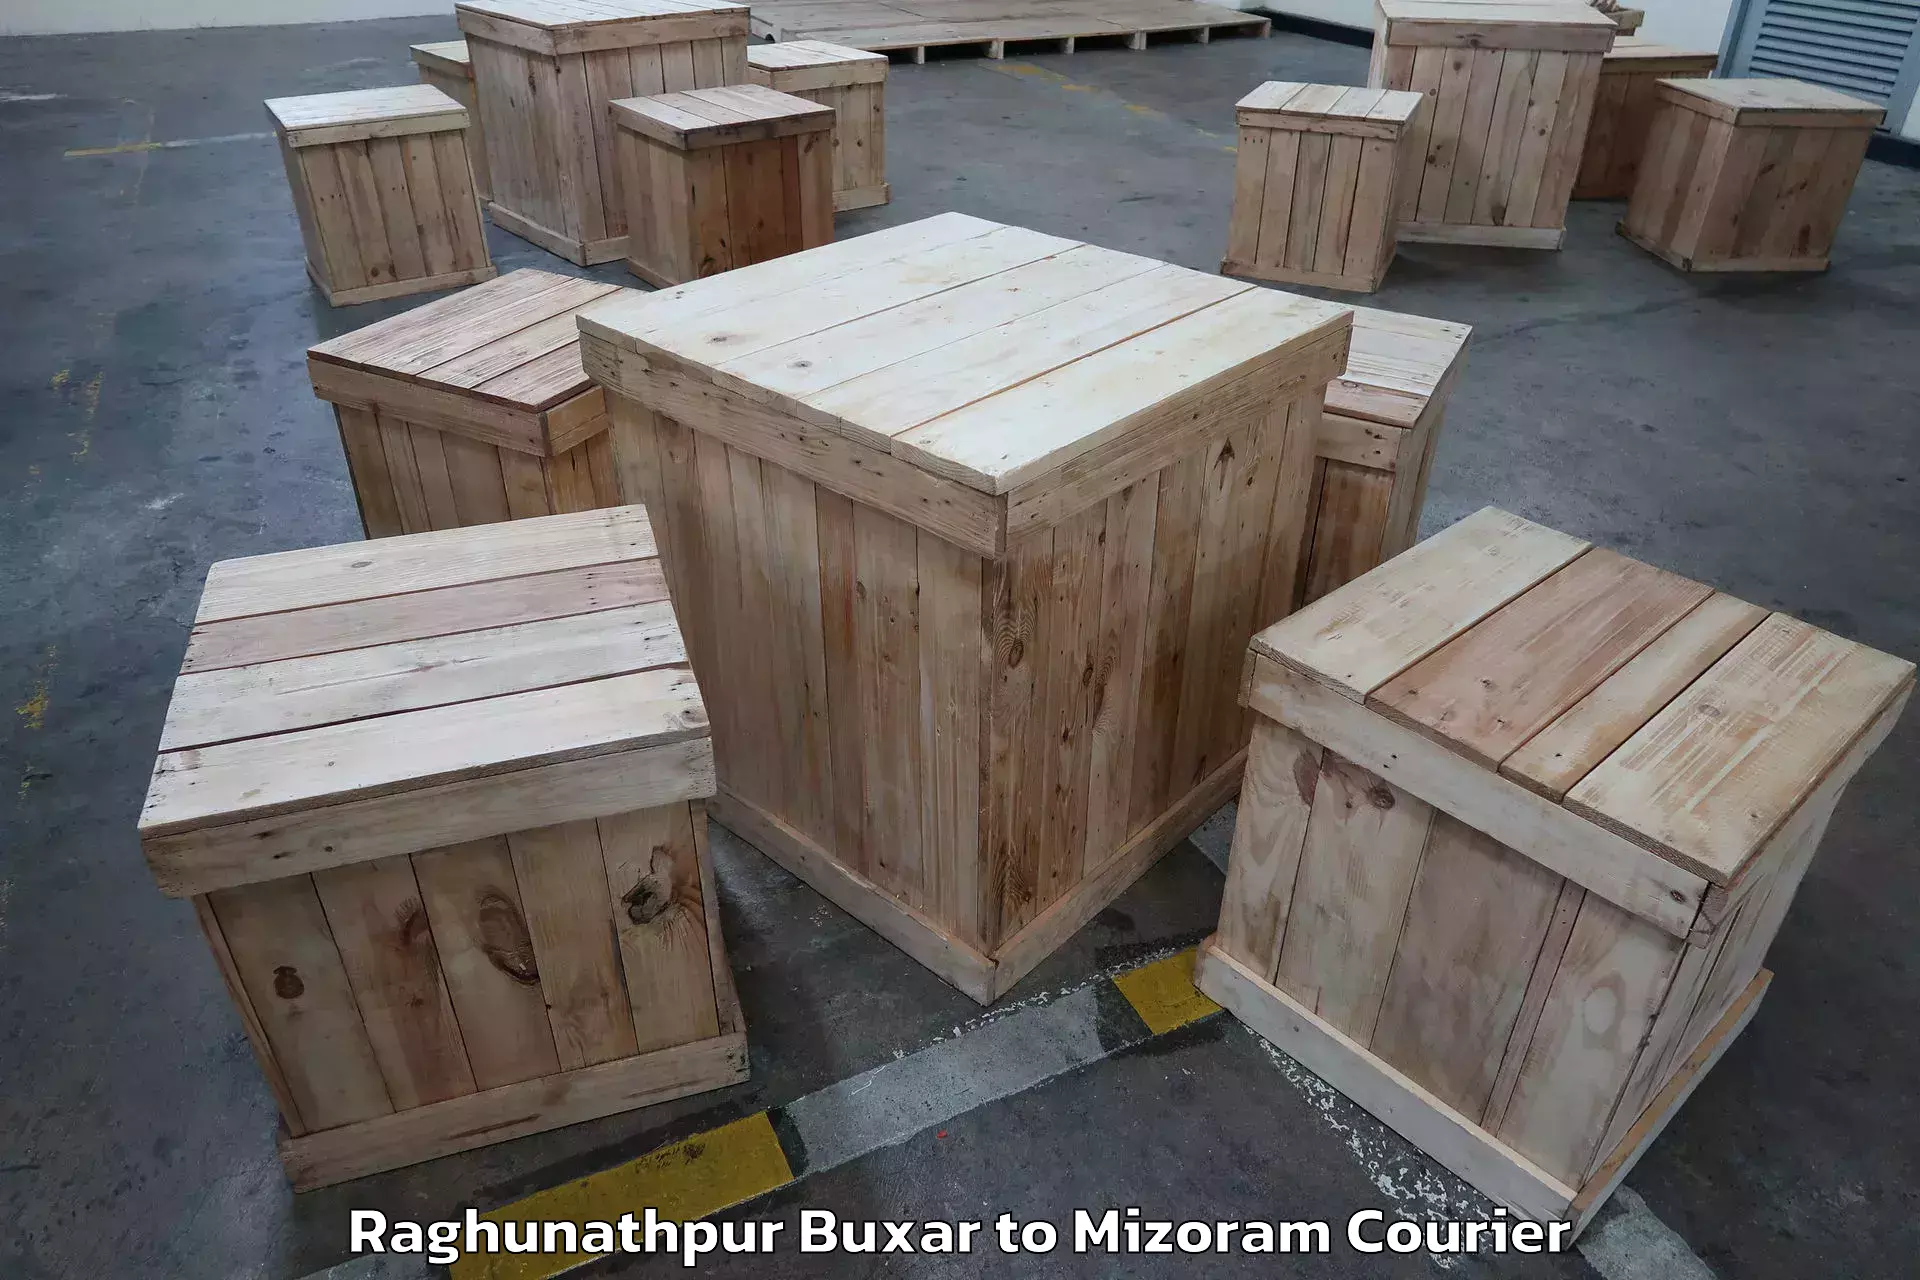 Moving and storage services Raghunathpur Buxar to Thenzawl